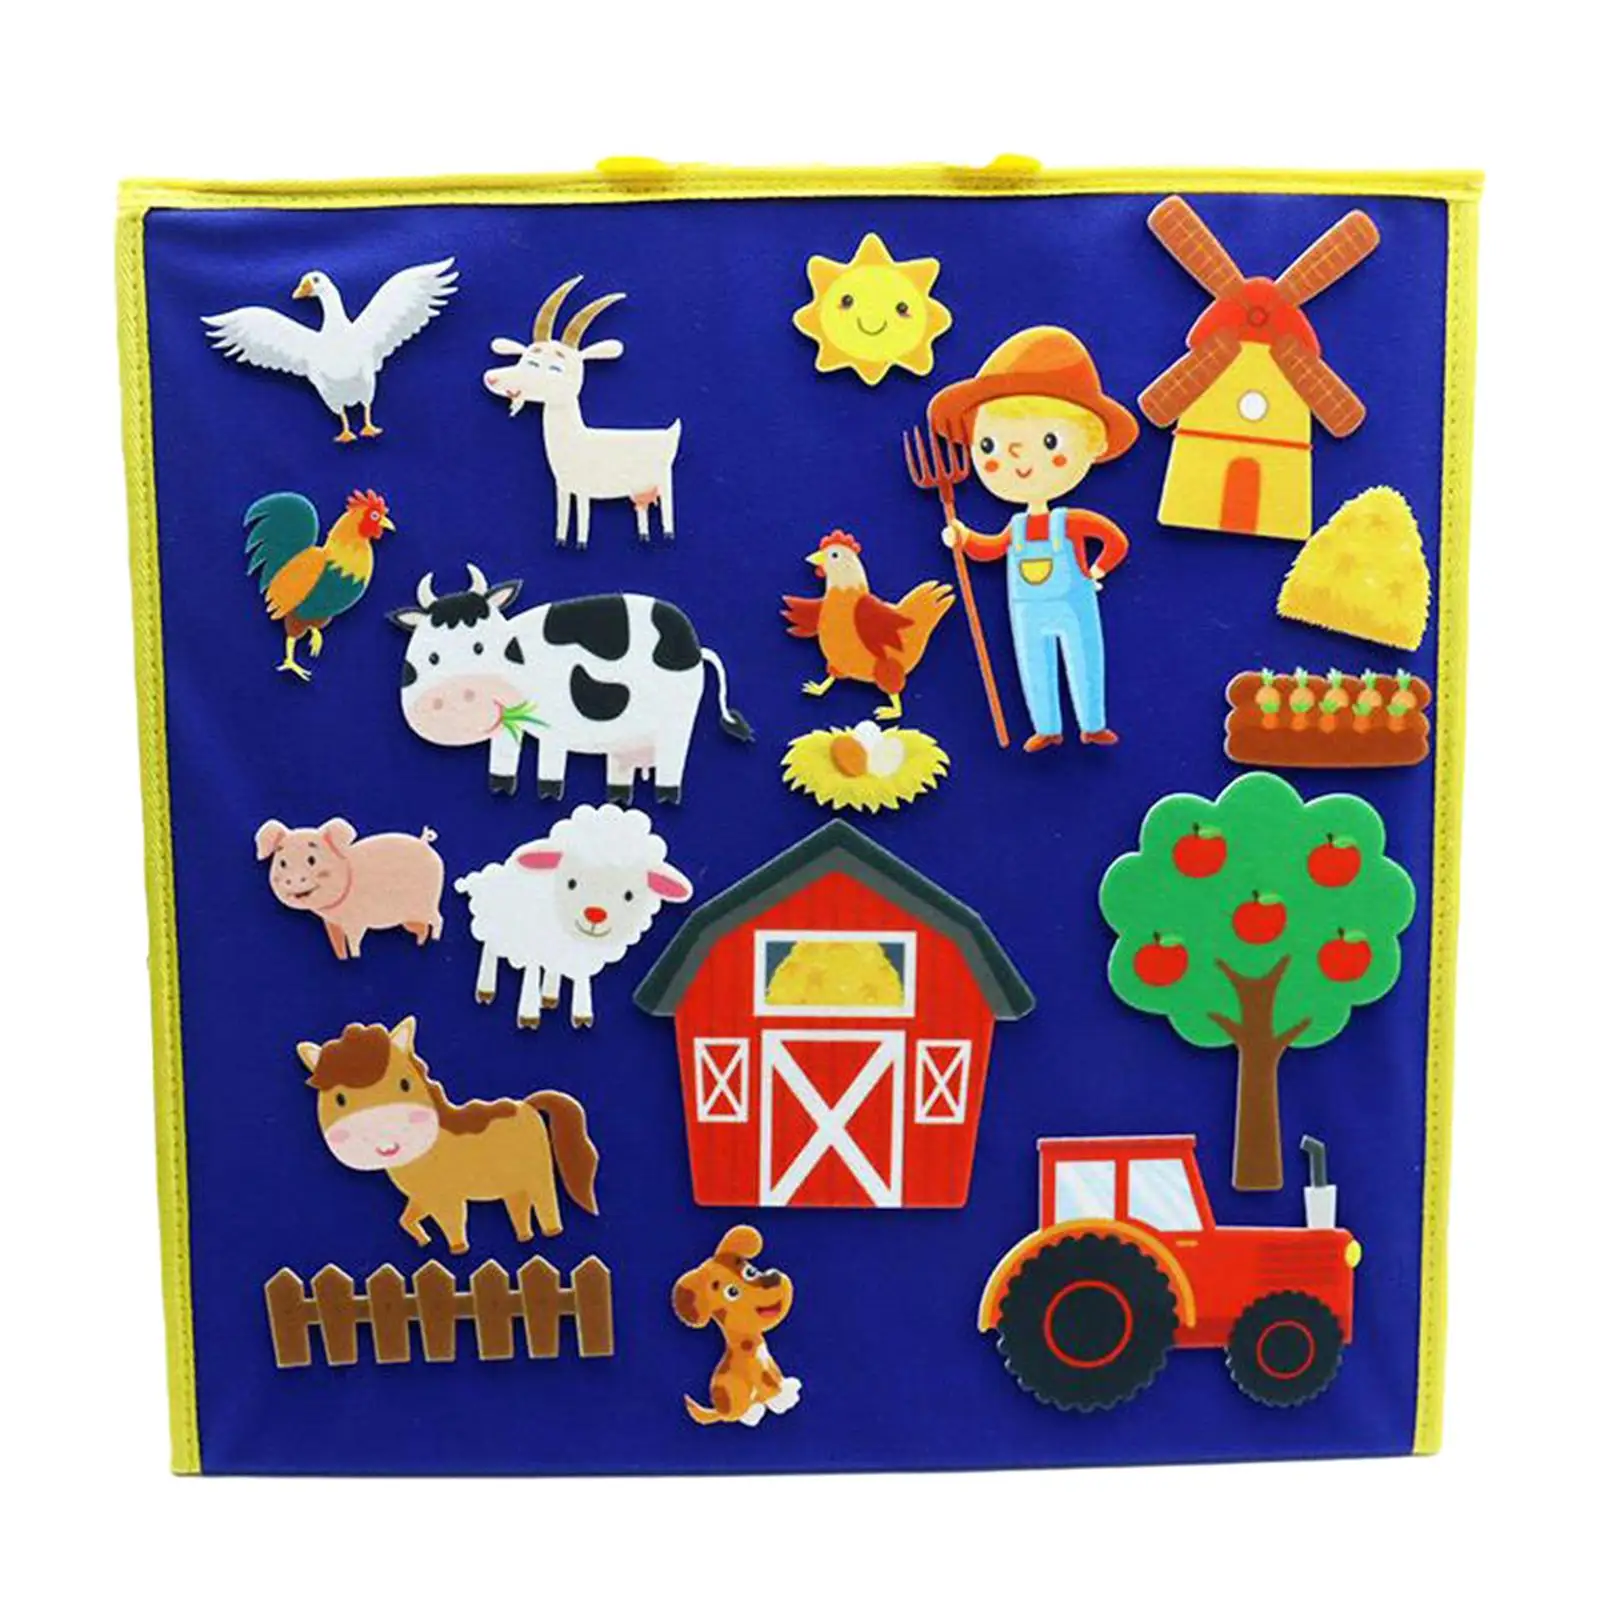 Felt Stories Activities Kits Party Art and Crafts Gift for 3+ Years Old Preschool Felt Flannel Board Quiet Book for Kids